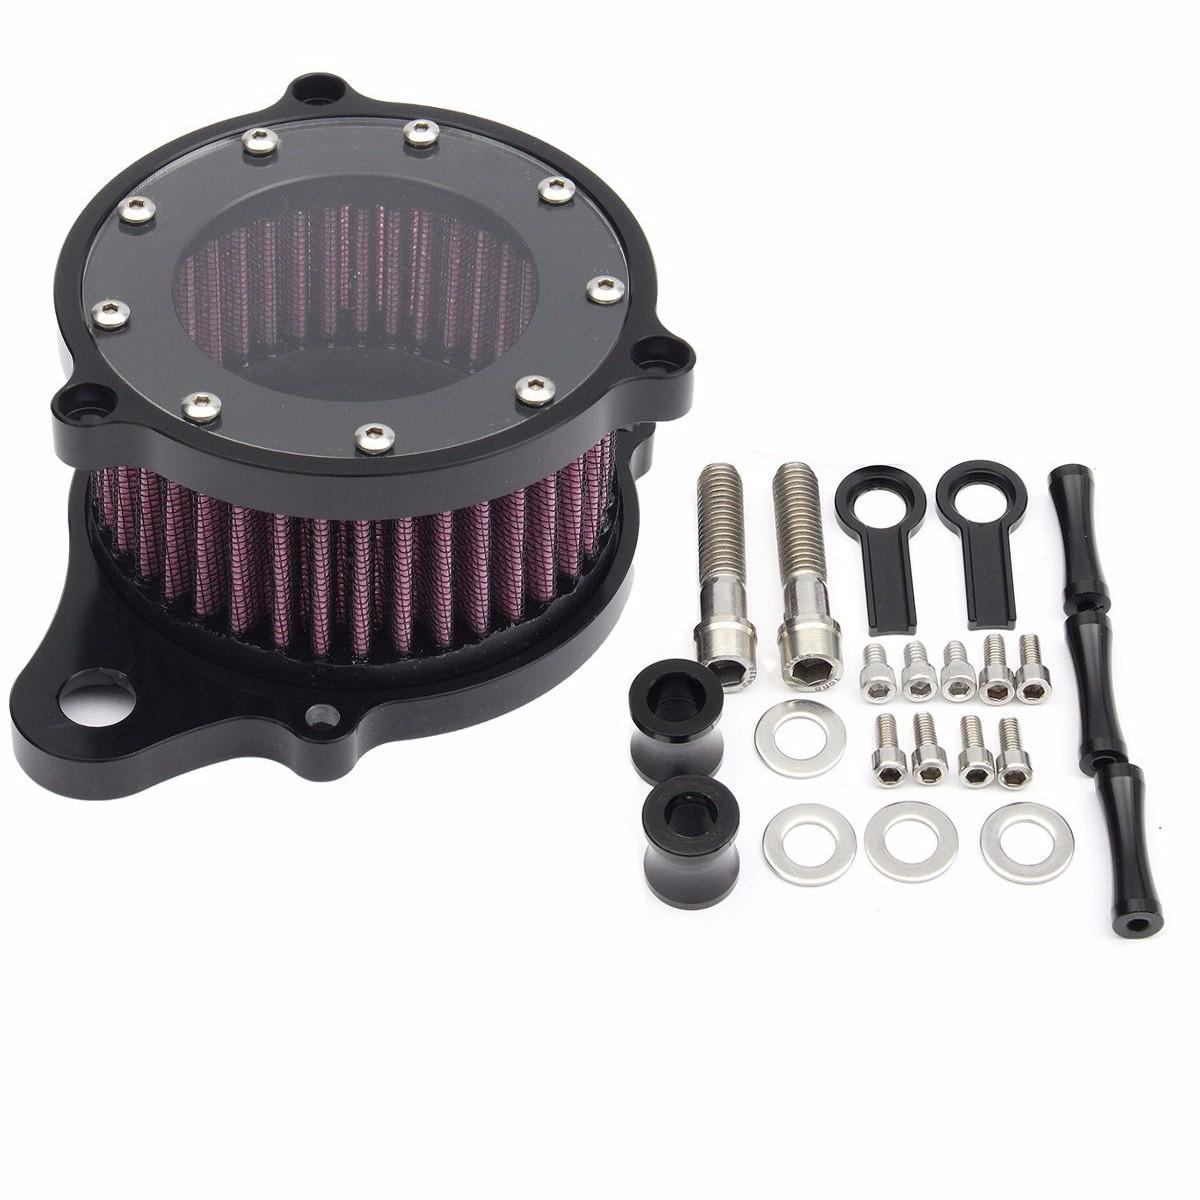 Motorcycle Air Cleaner Intake Filter System Aluminum For Harley-Davidson Sports XL 883 1200 2004 2005 2006 2007 2008 200